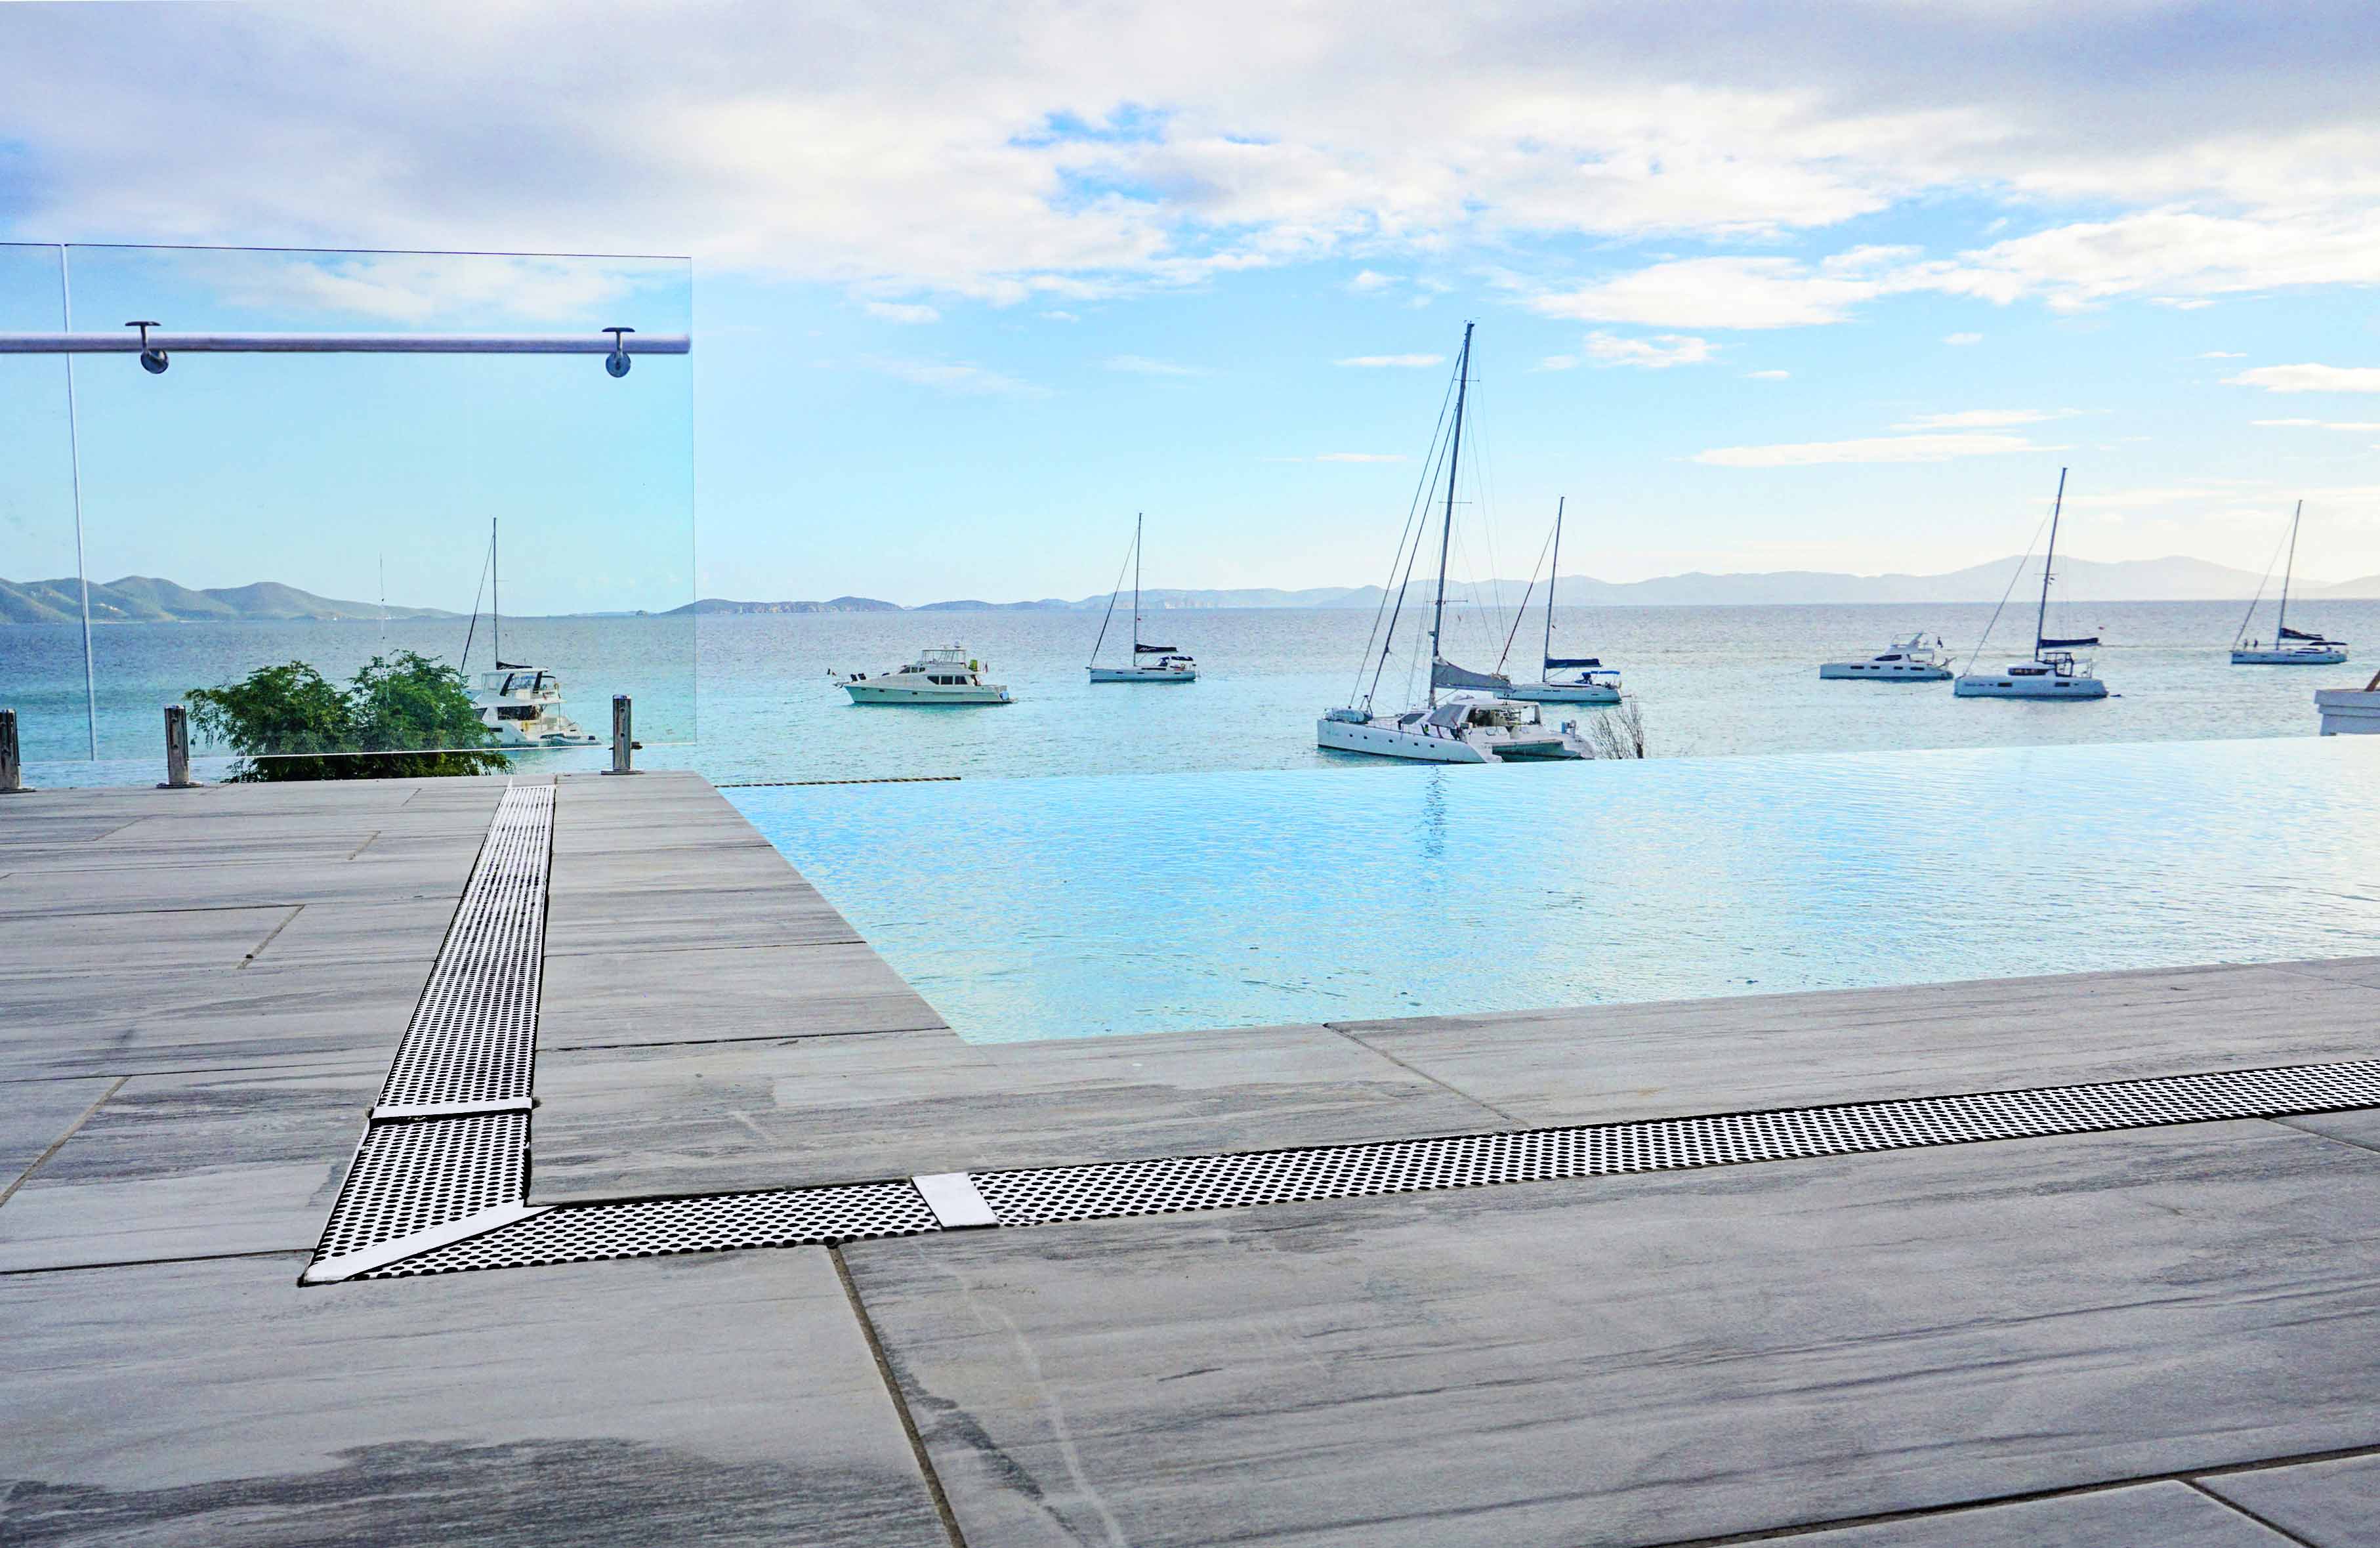 Watch sailboats touch the horizon while swimming in the infinity pool.